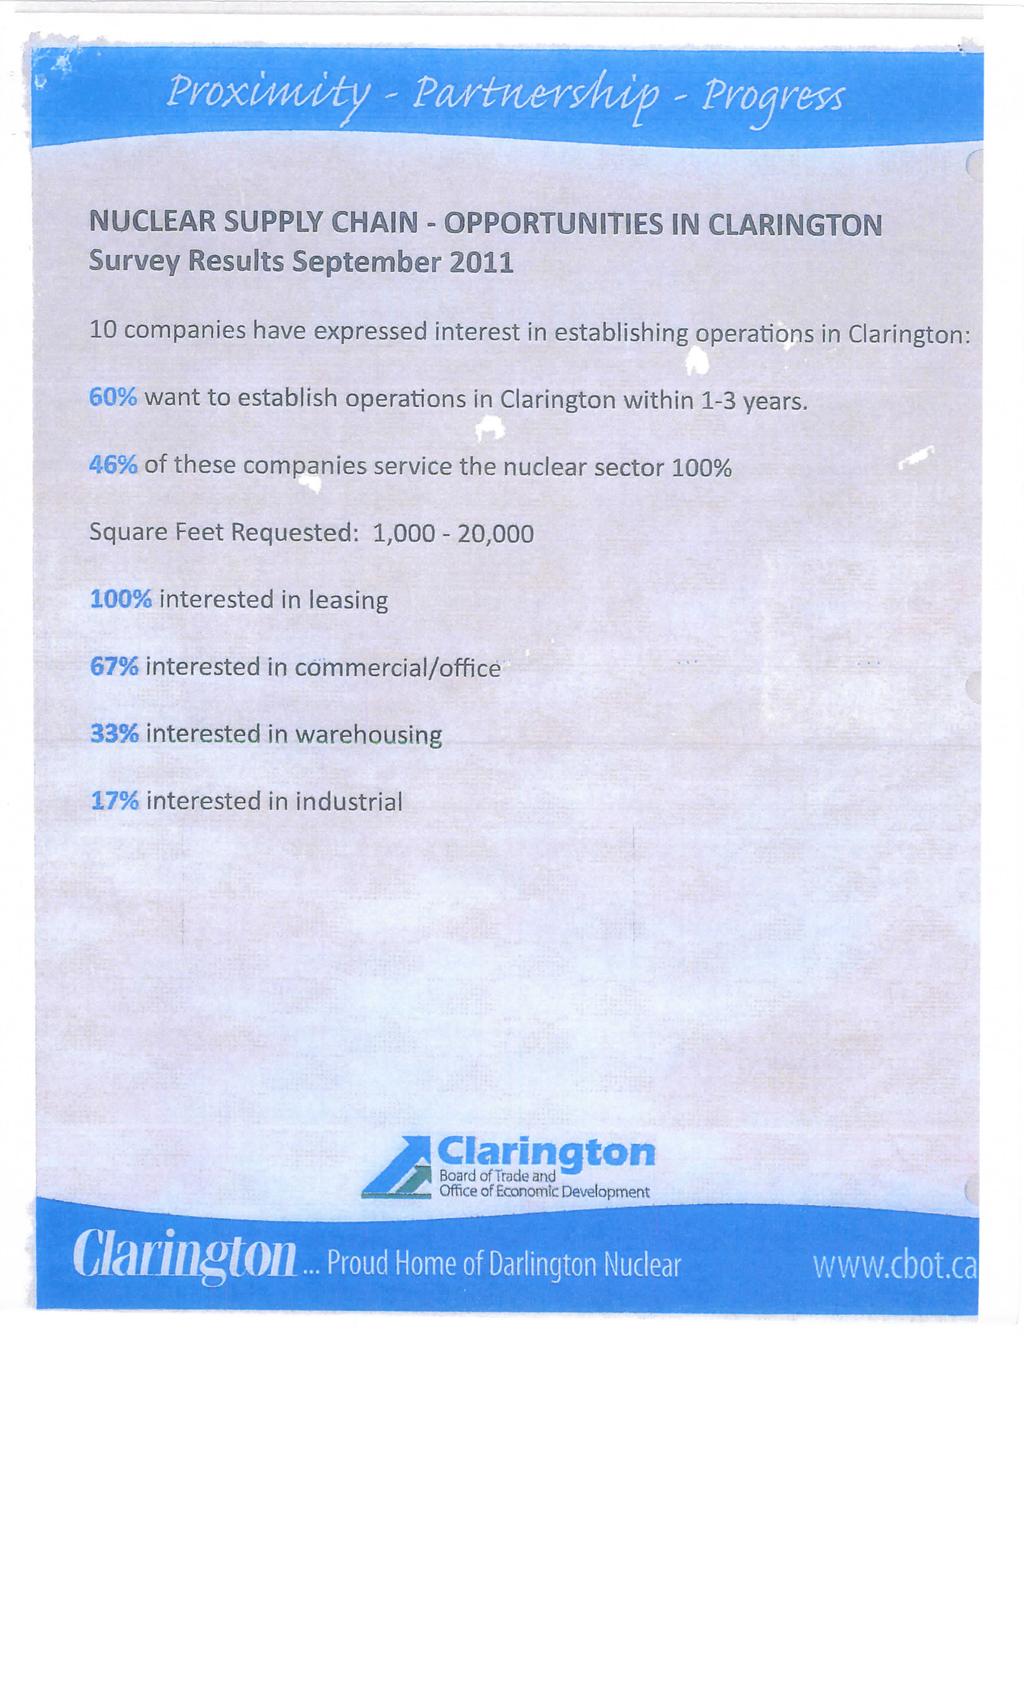 NUCLEAR SUPPLY CHAIN - OPPORTUNITIES IN CLARINGTON Survey Results September 2011 10 companies have expressed interest in establishing operations in : 60% want to establish operations in within 1-3